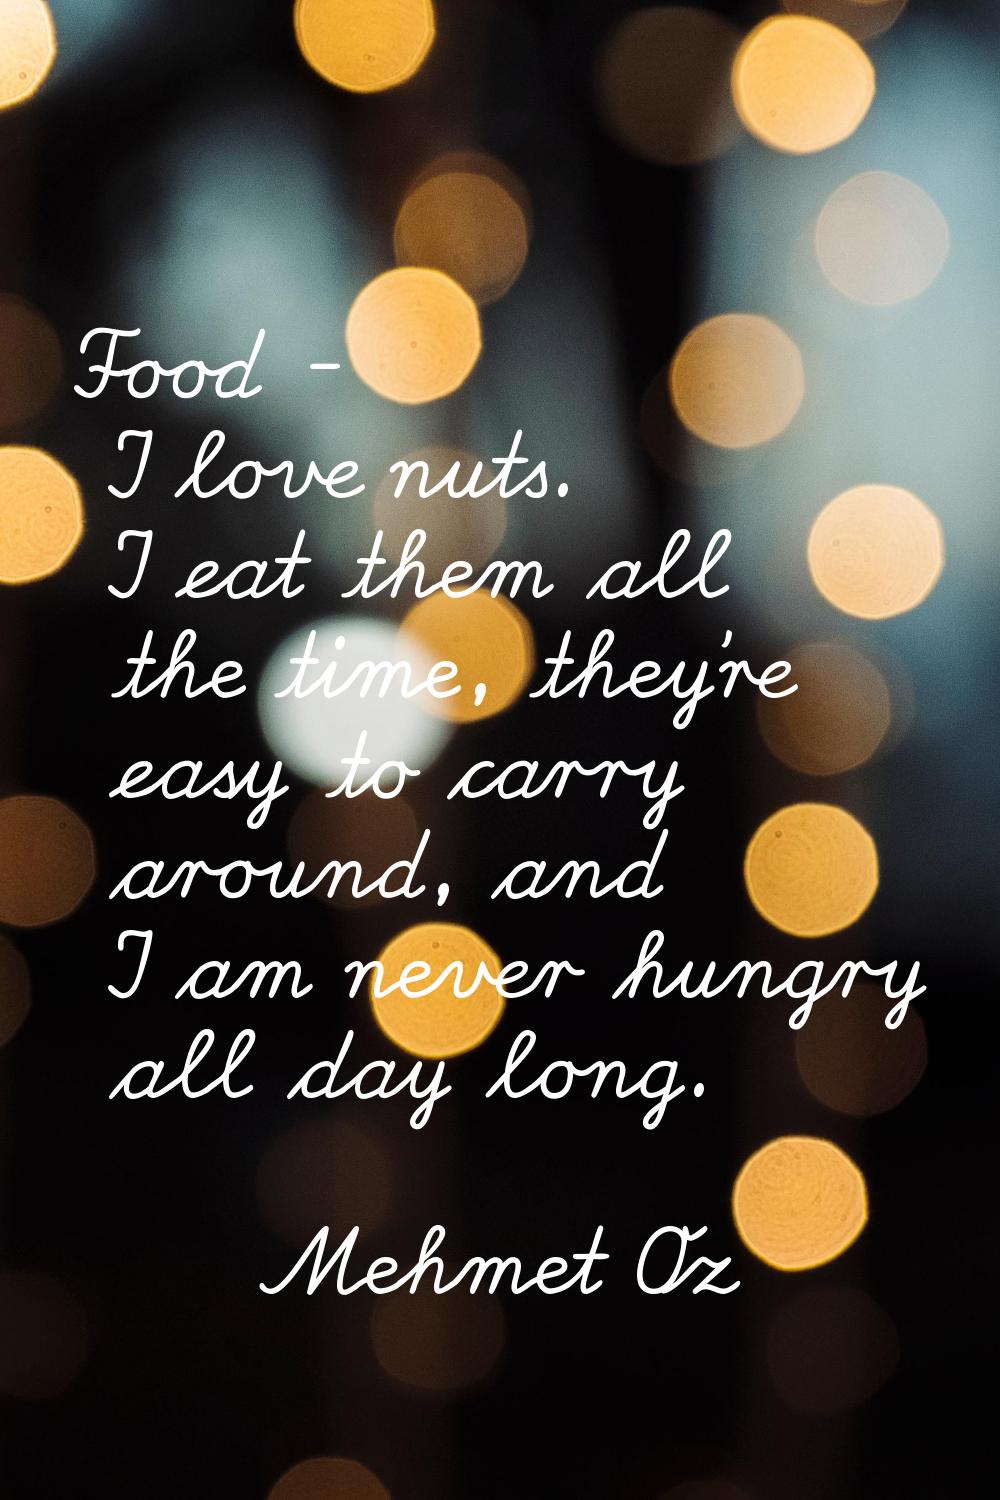 Food - I love nuts. I eat them all the time, they're easy to carry around, and I am never hungry al